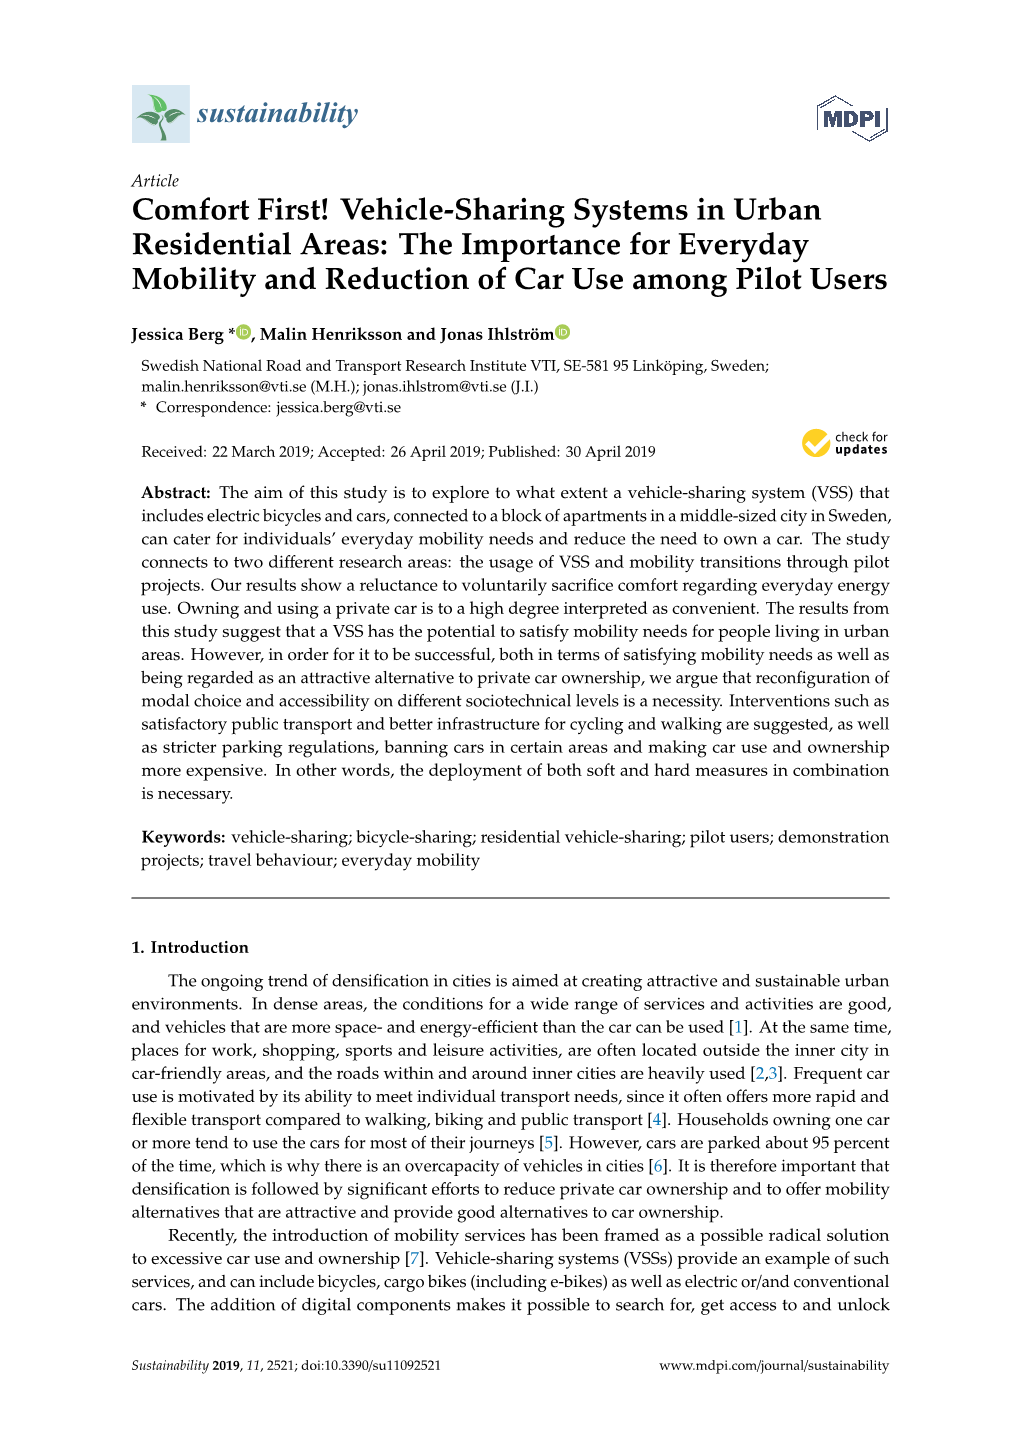 Comfort First! Vehicle-Sharing Systems in Urban Residential Areas: the Importance for Everyday Mobility and Reduction of Car Use Among Pilot Users